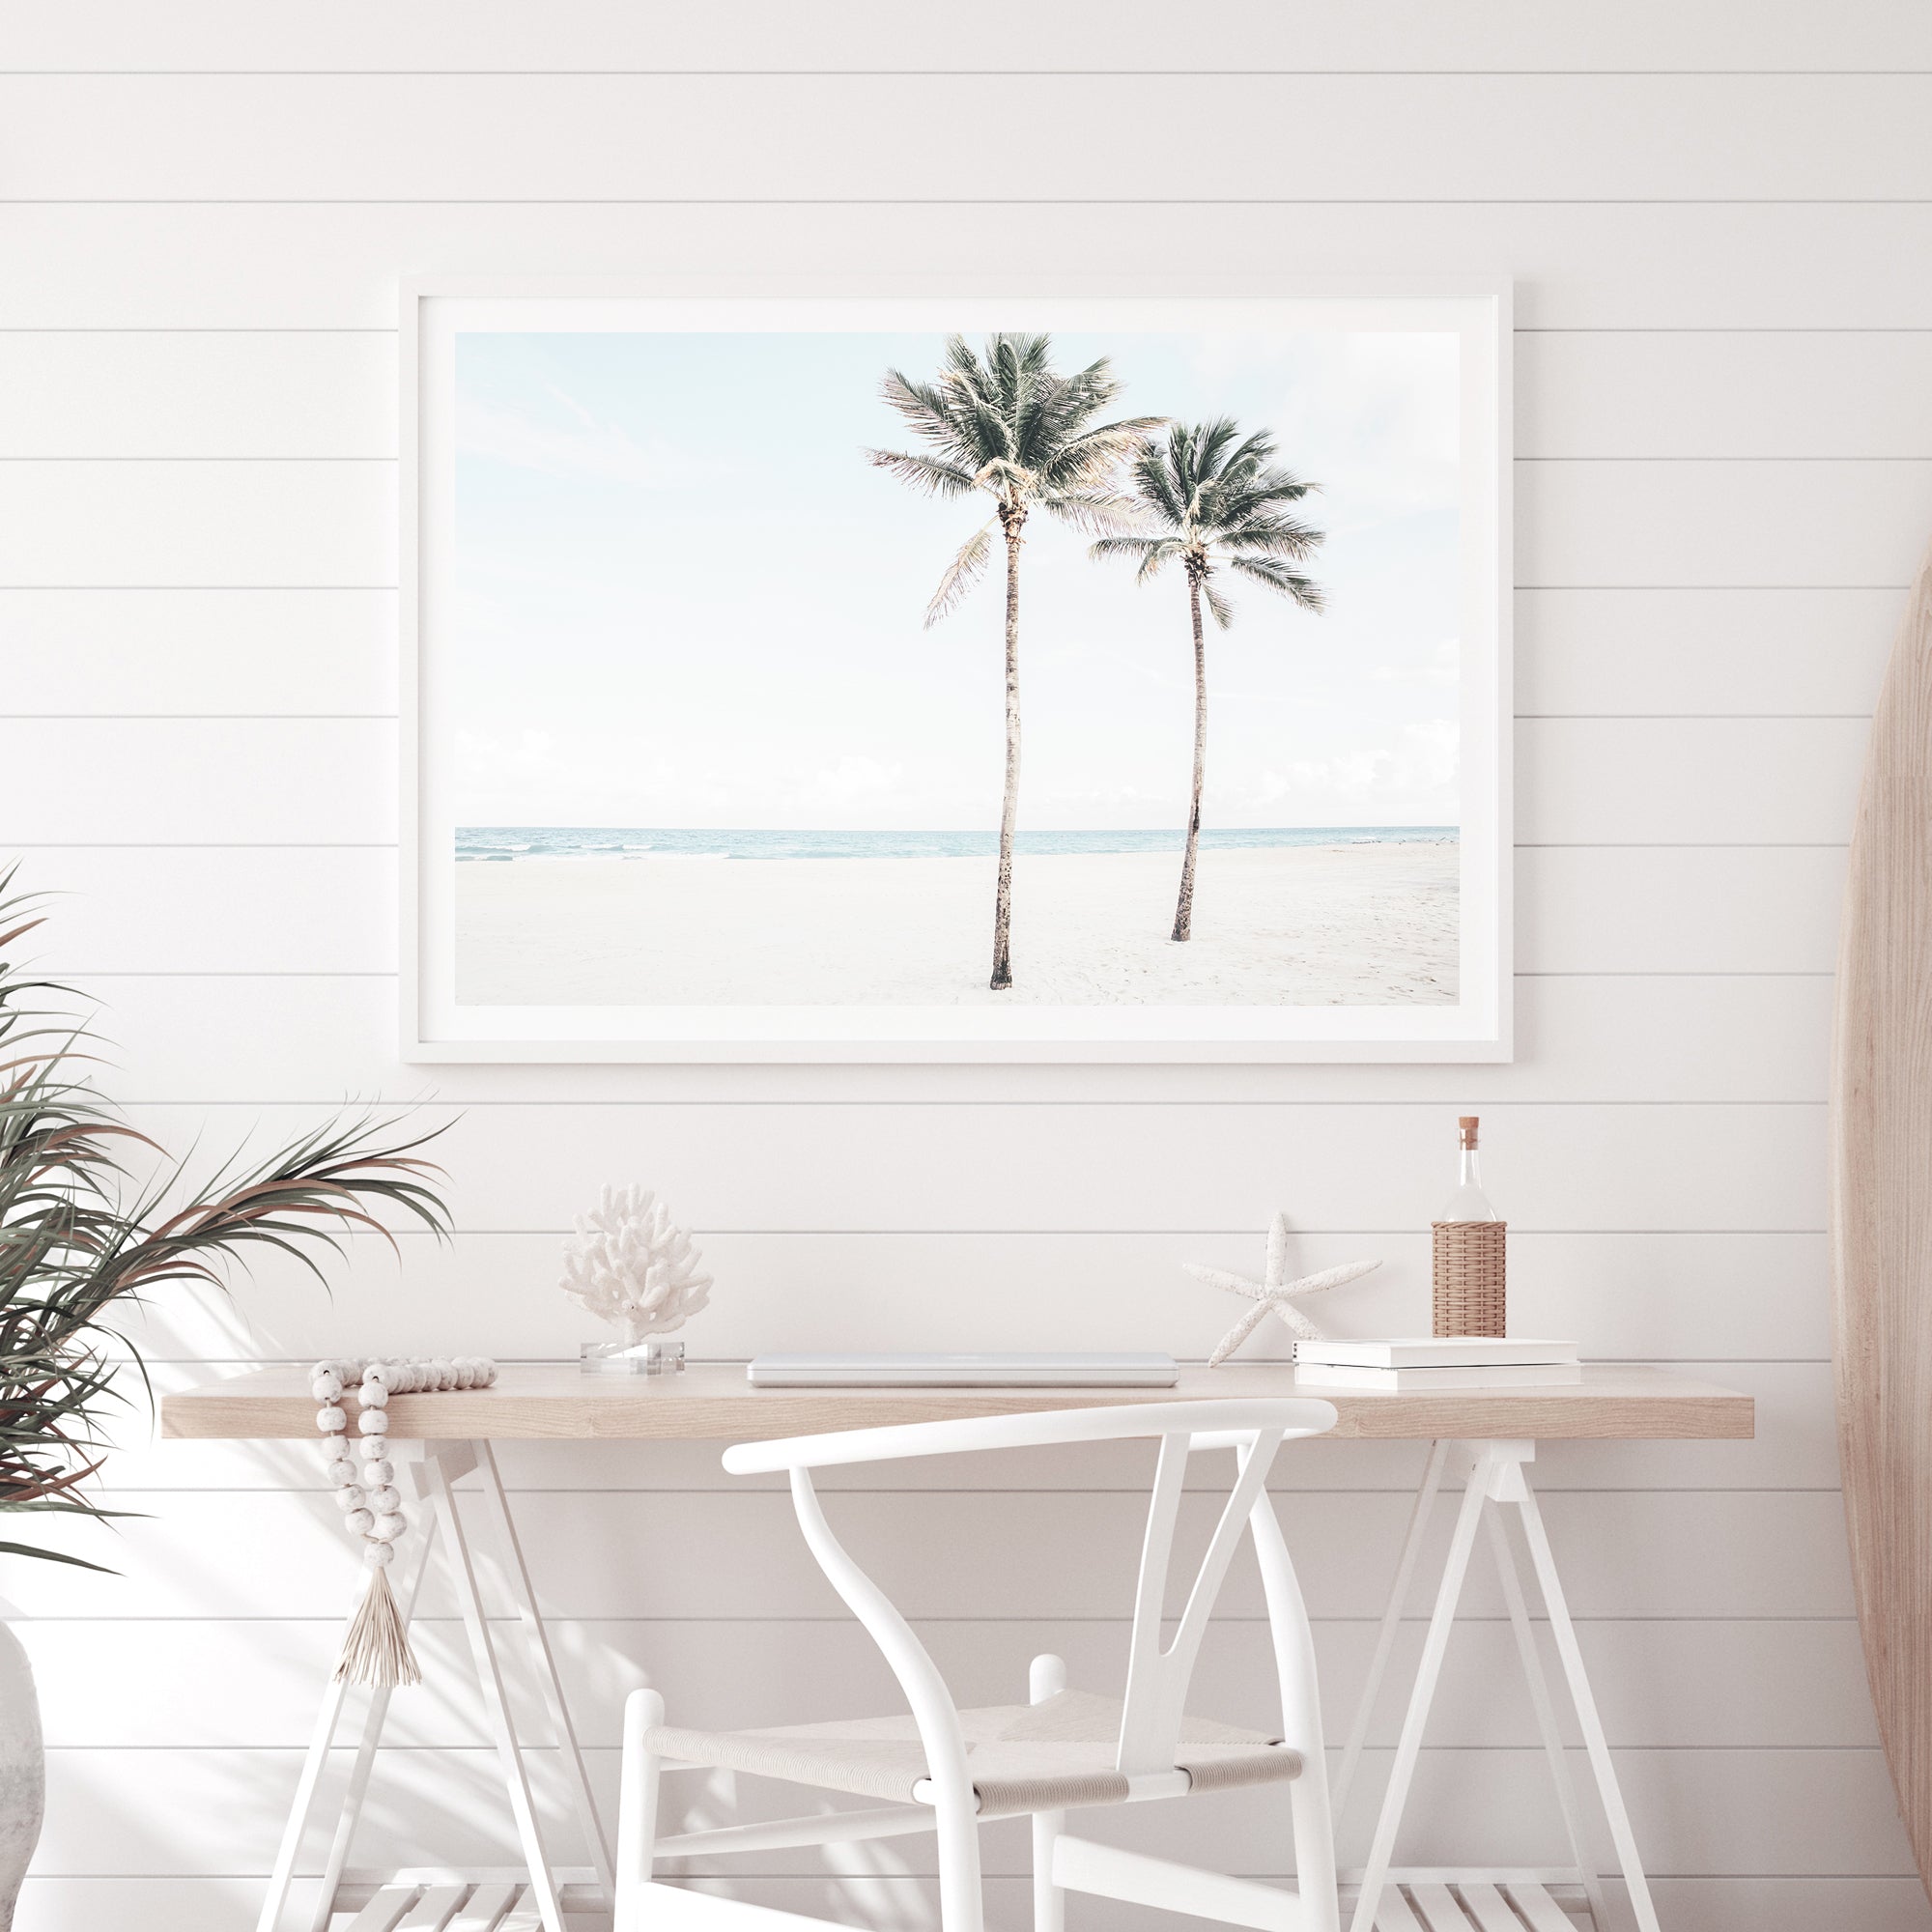 A stretched canvas coastal artwork of two palm trees and the beach, available framed or unframed.